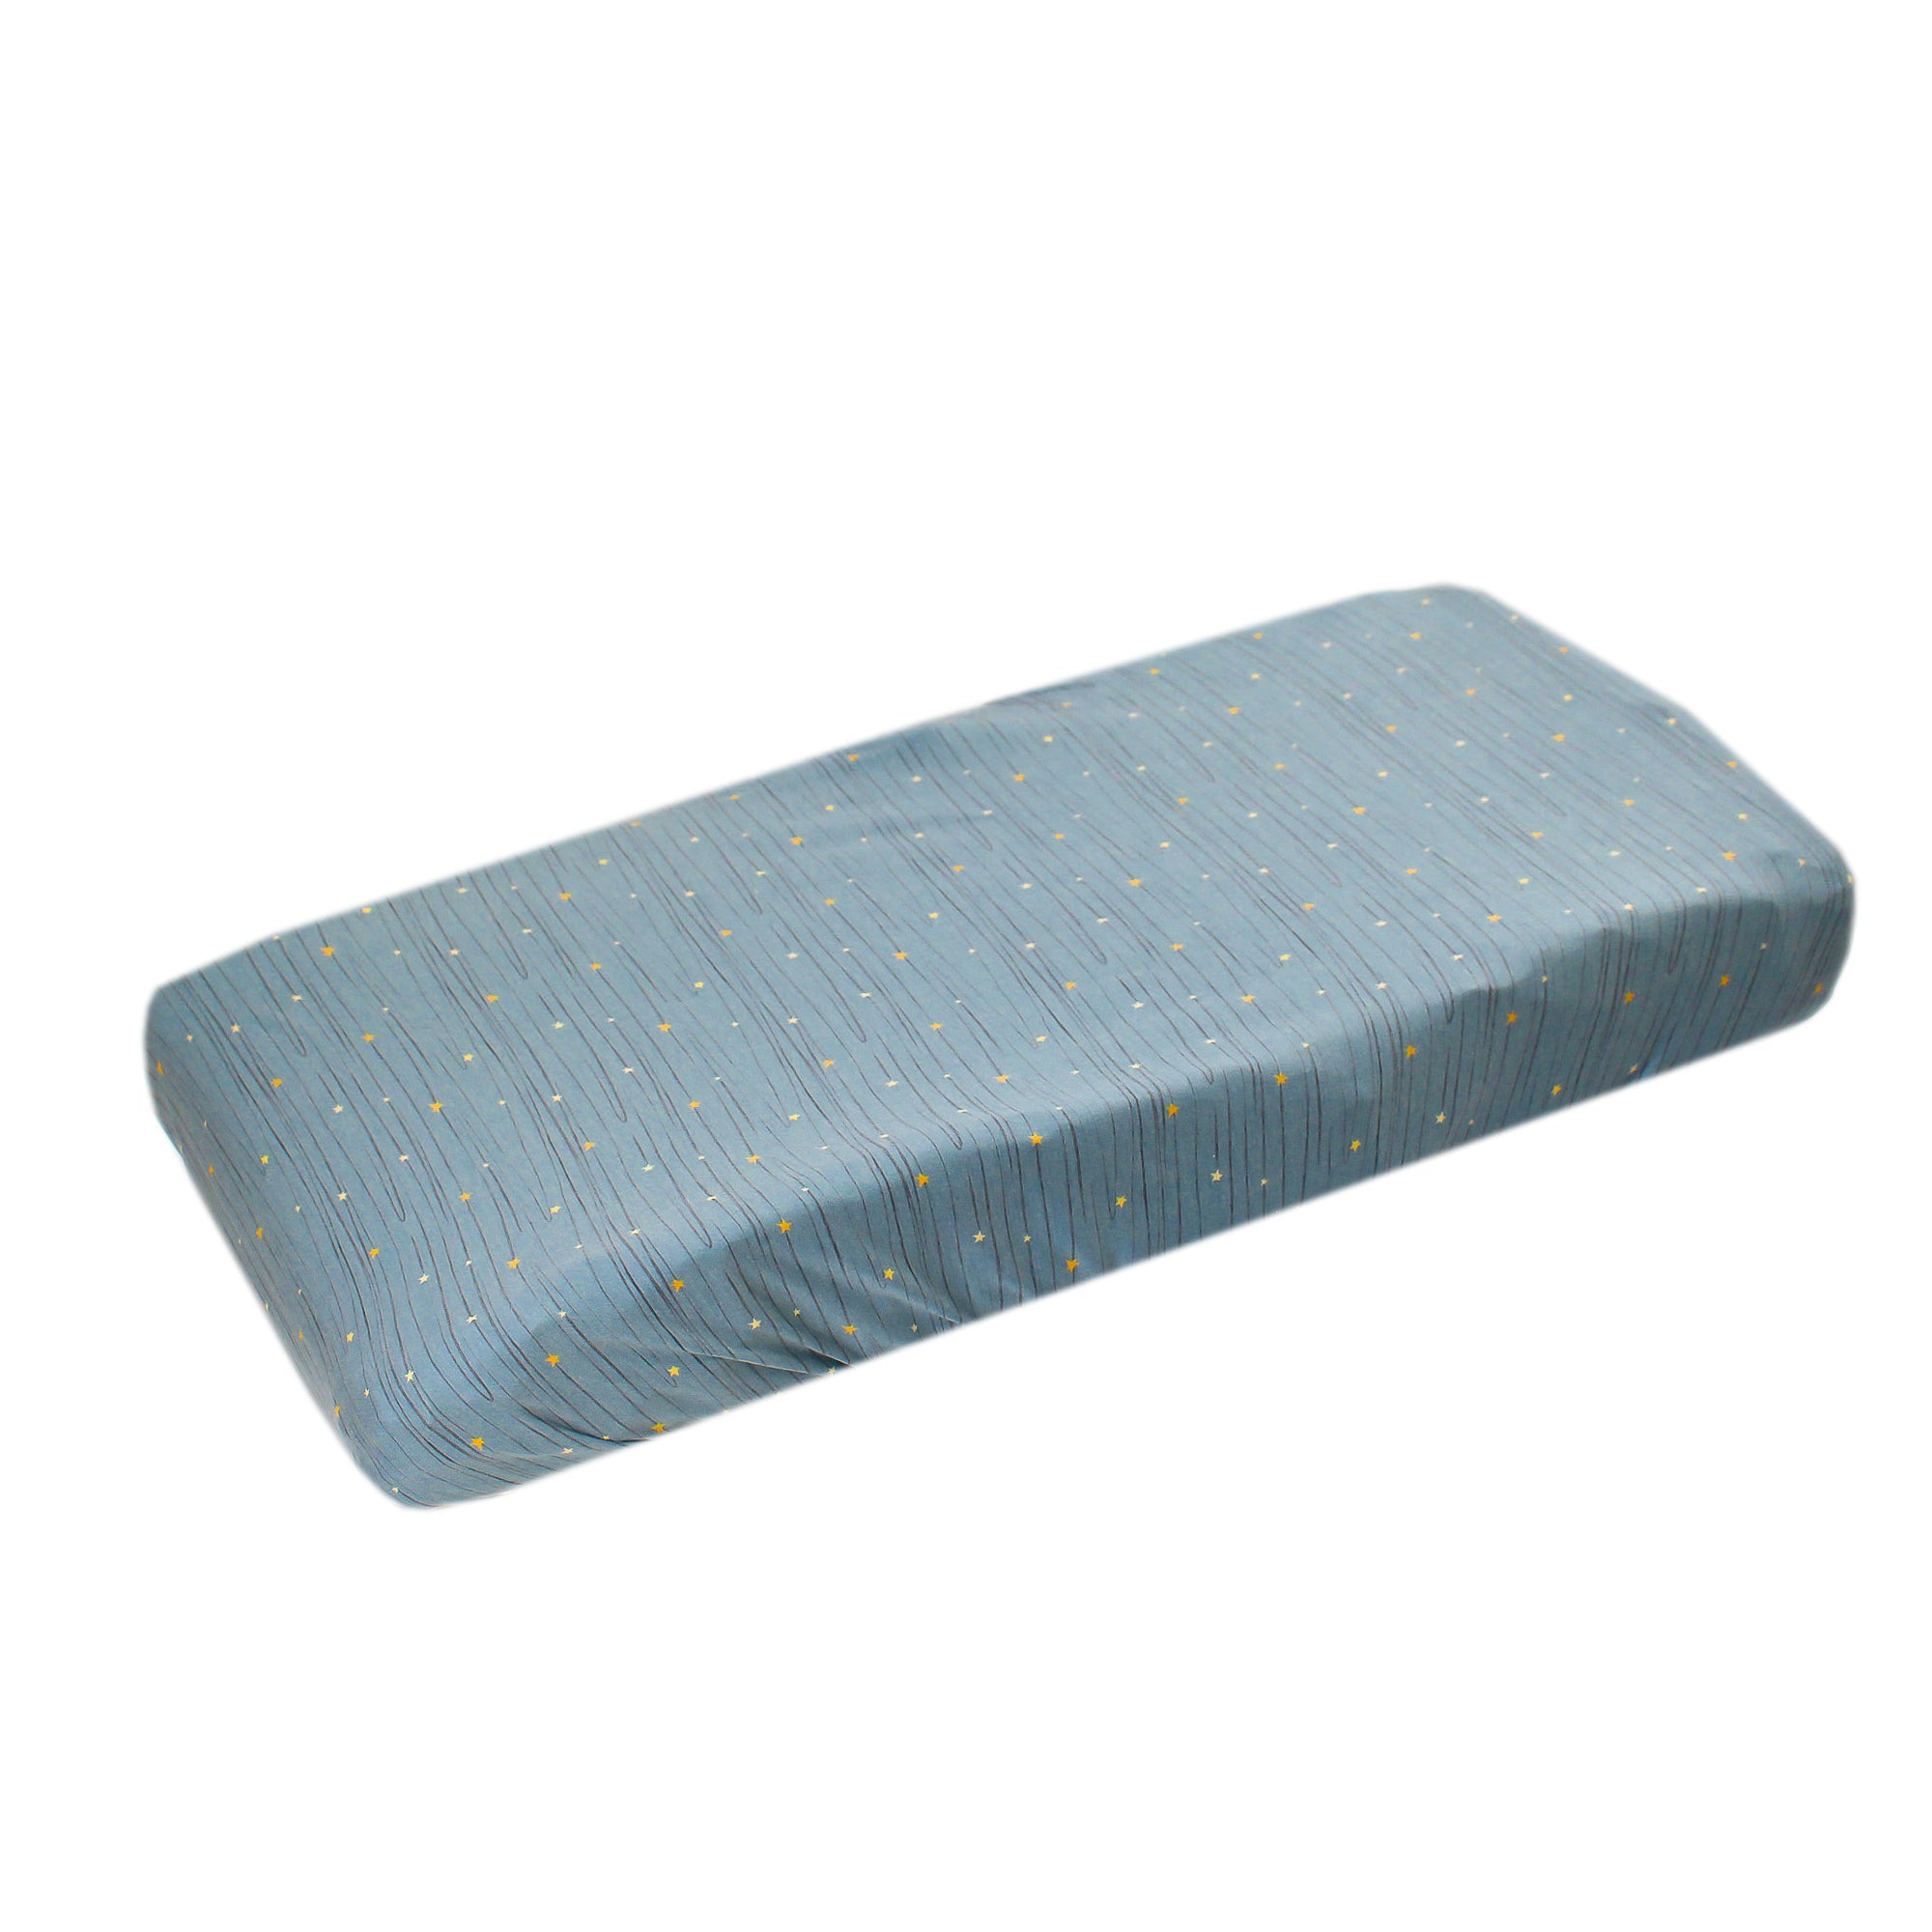 Premium Knit Diaper Changing Pad Cover - Starlight